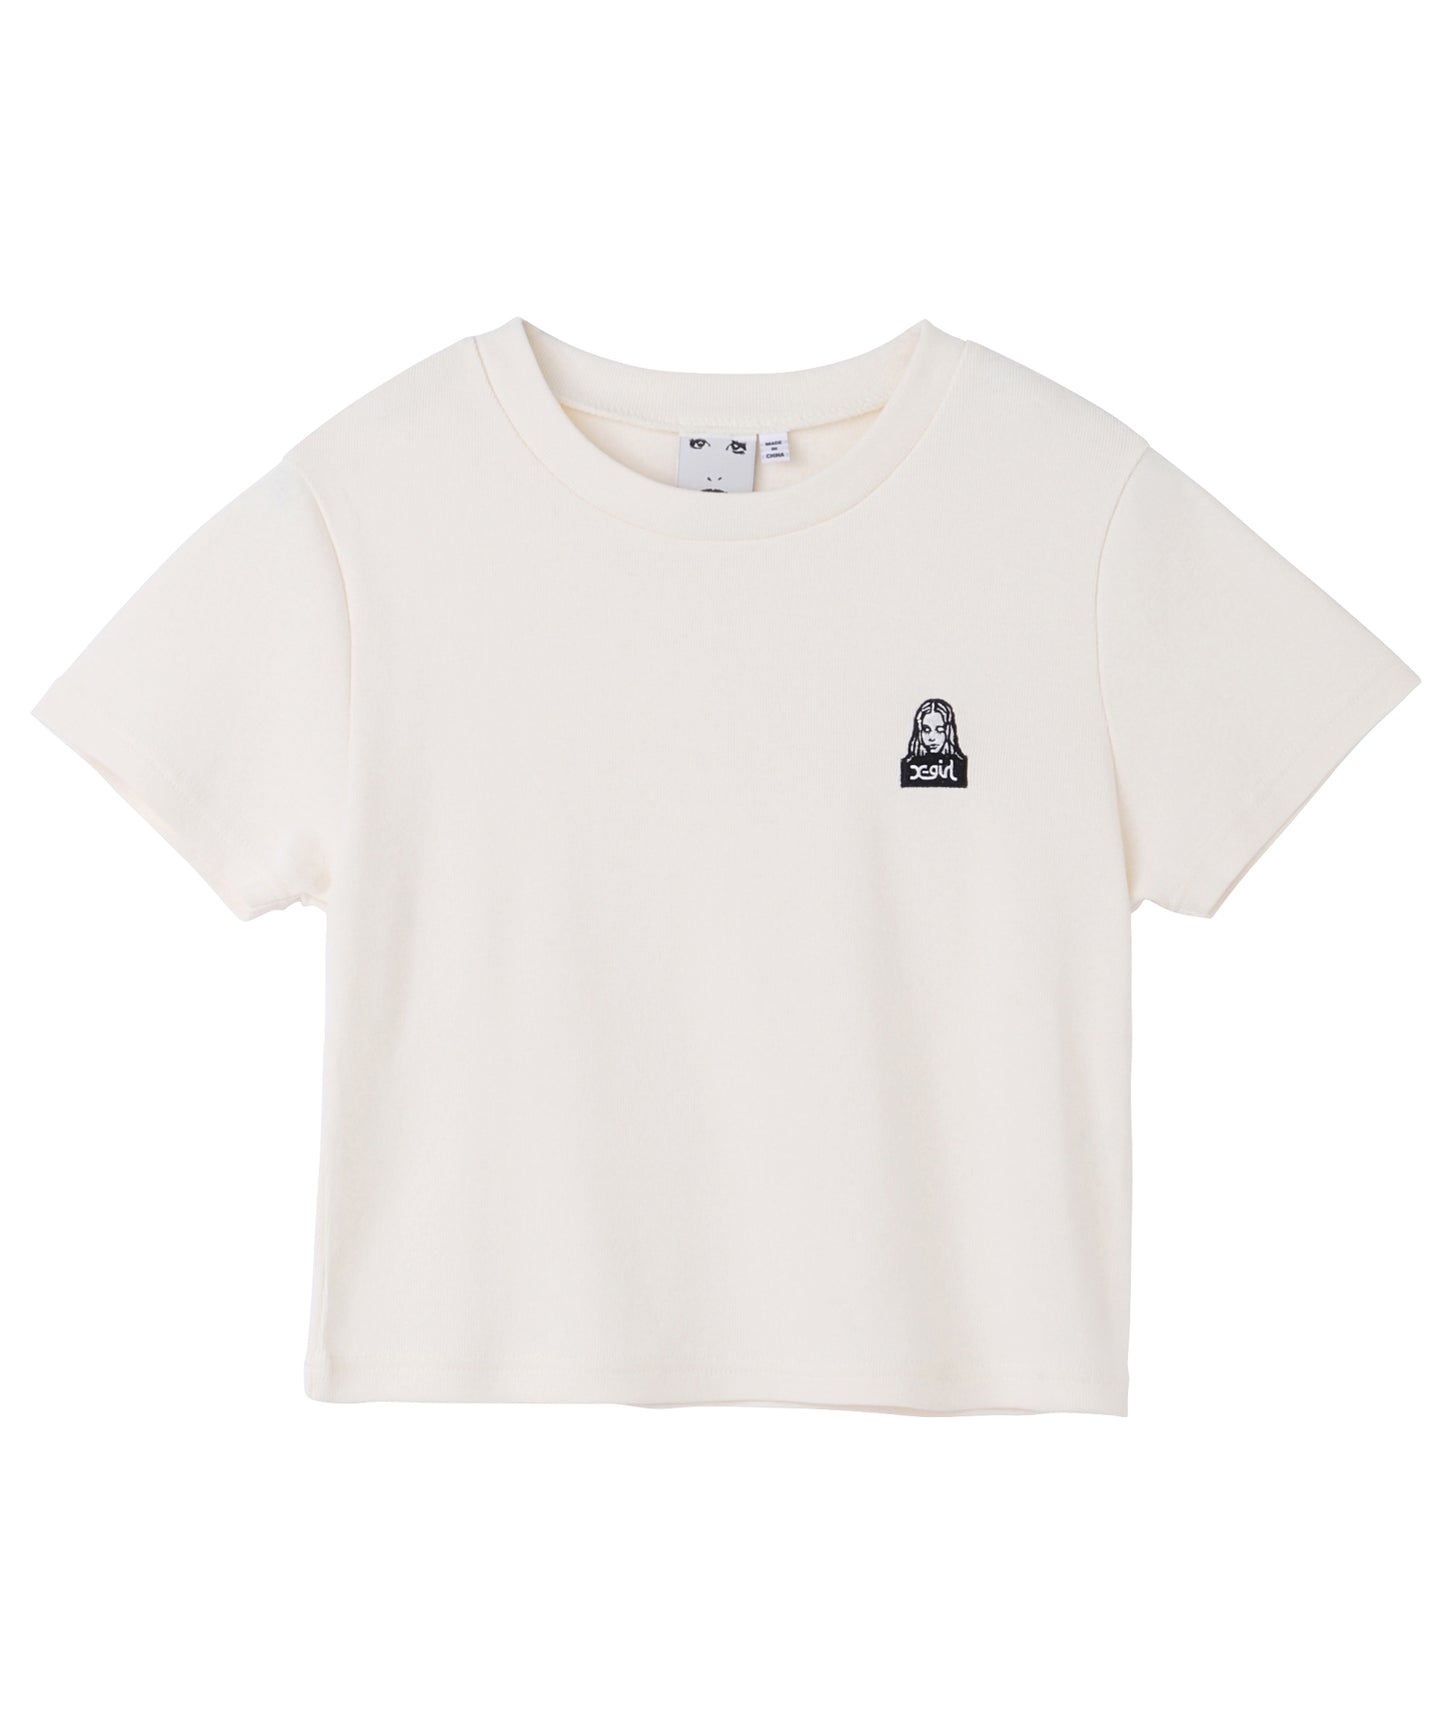 FACE COMPACT S/S TEE